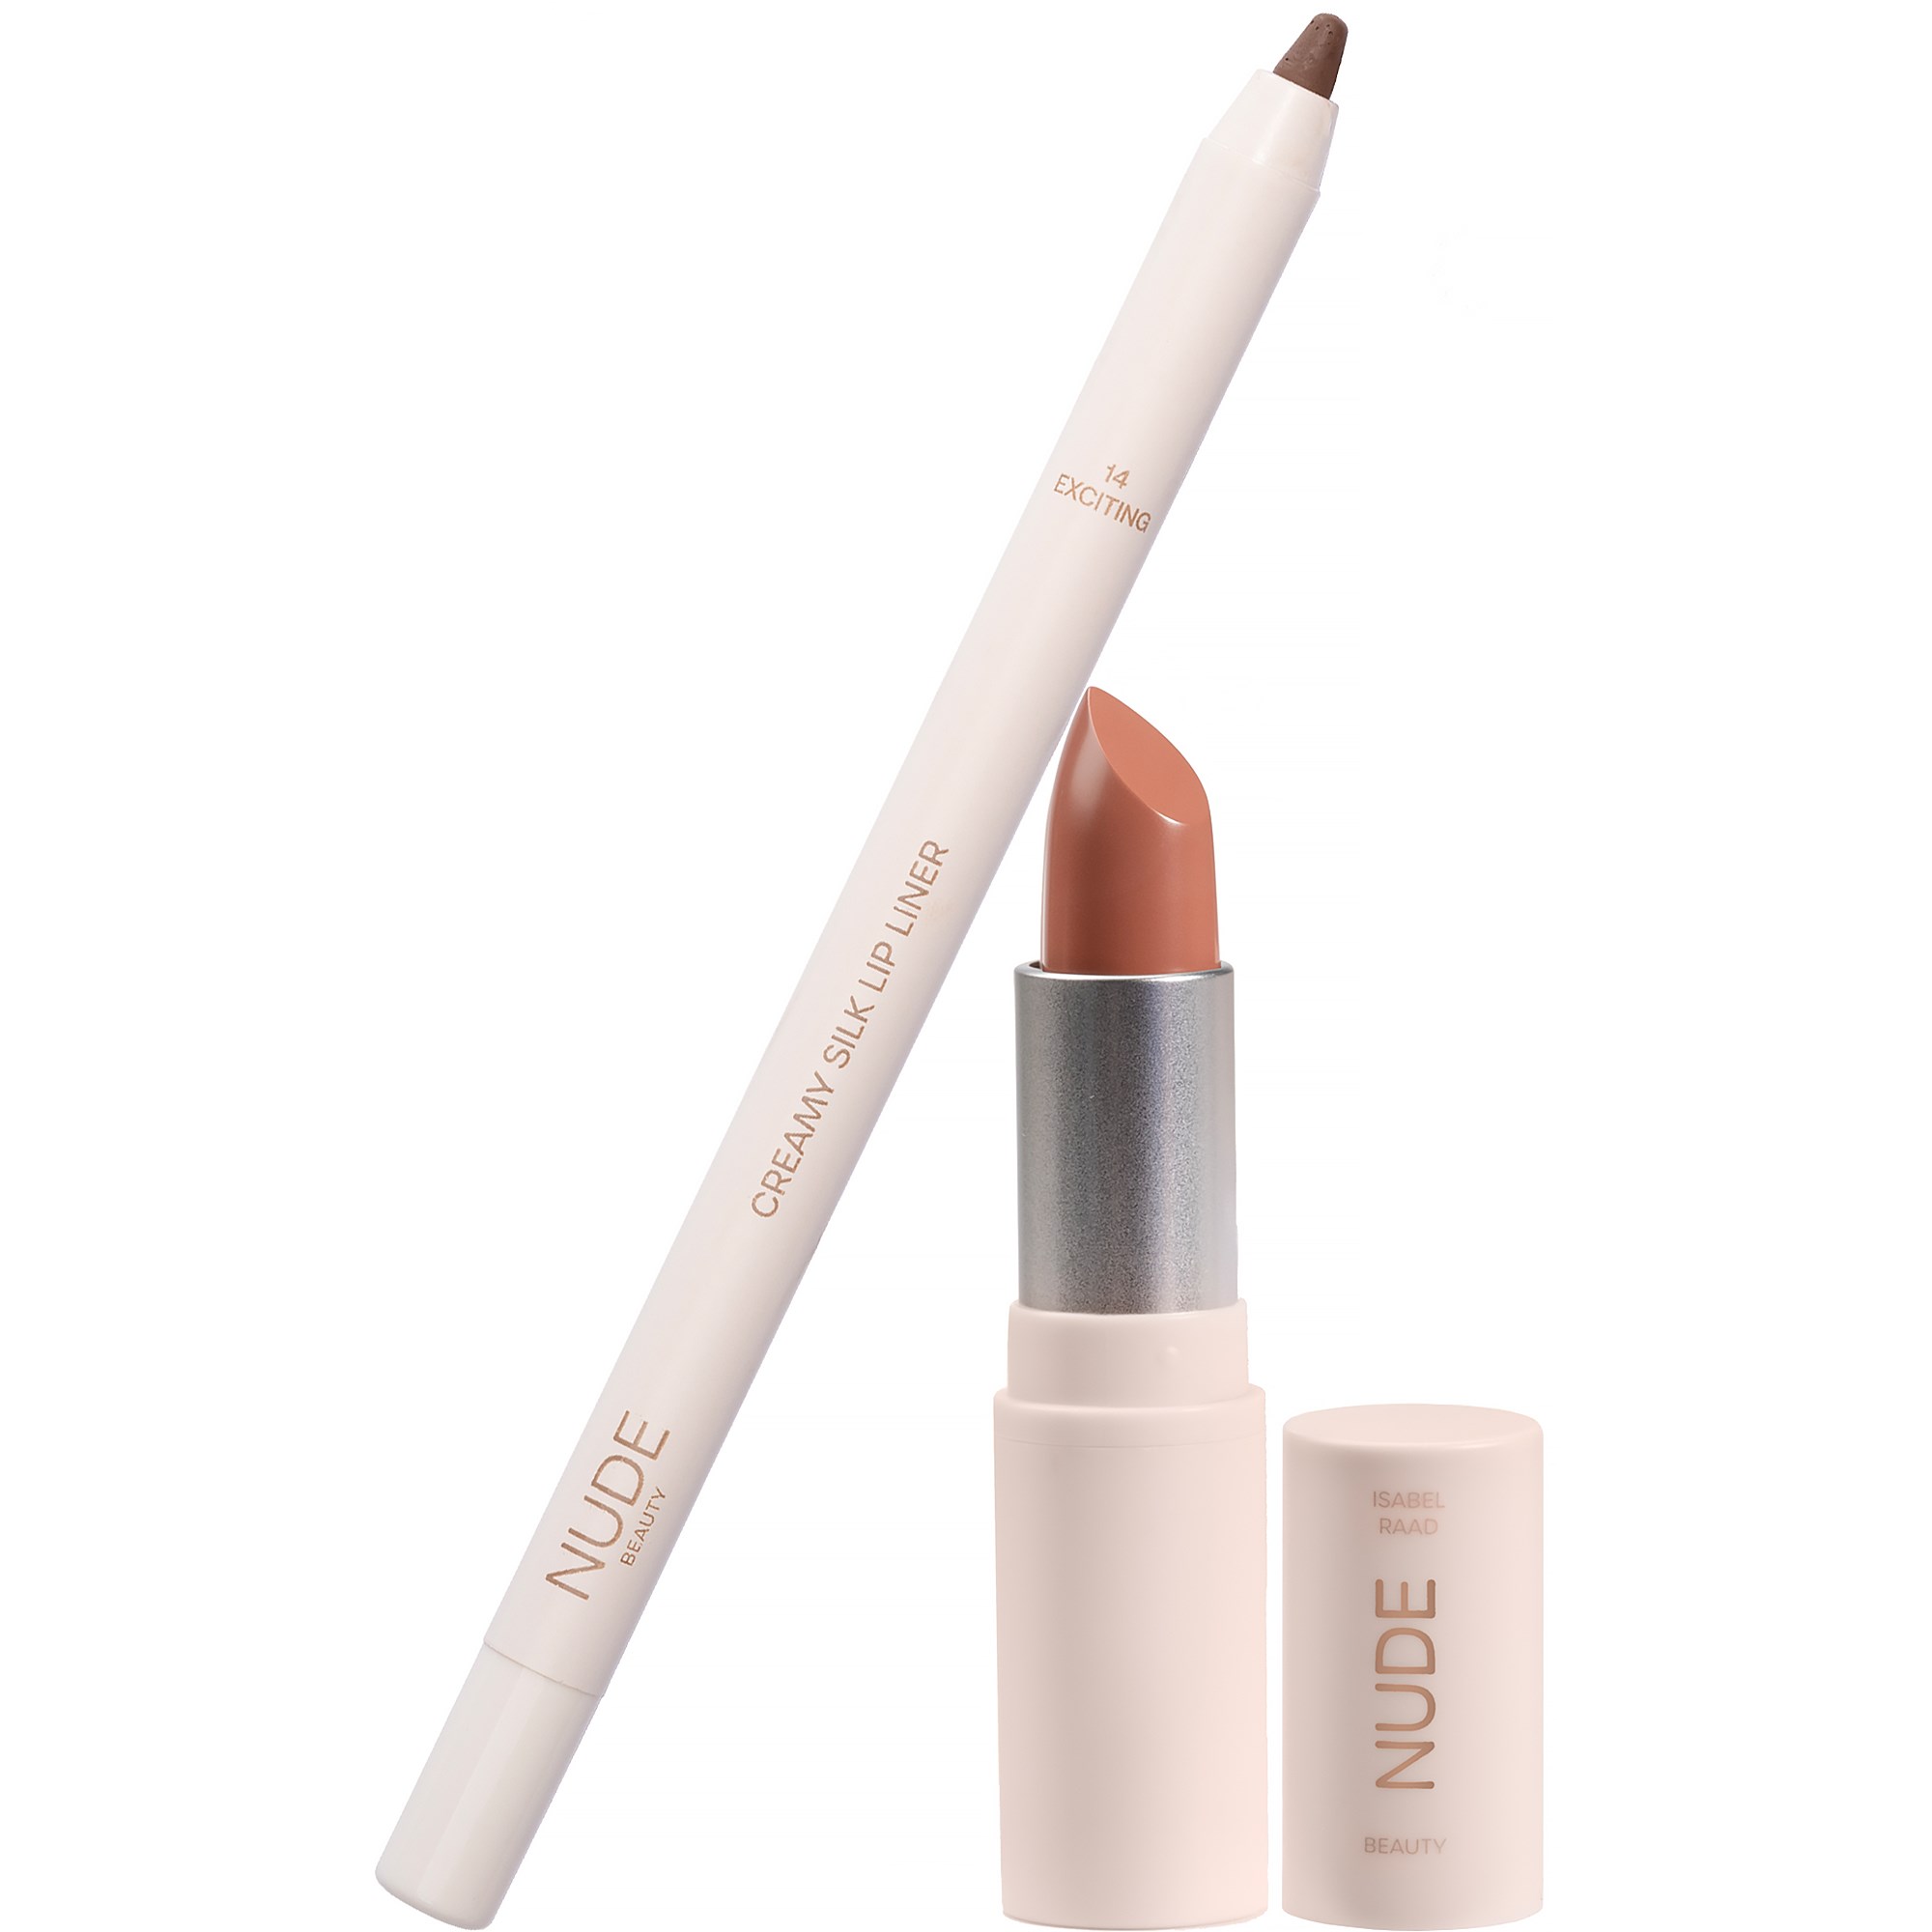 Läs mer om Nude Beauty Lip Duo Exciting Kiss